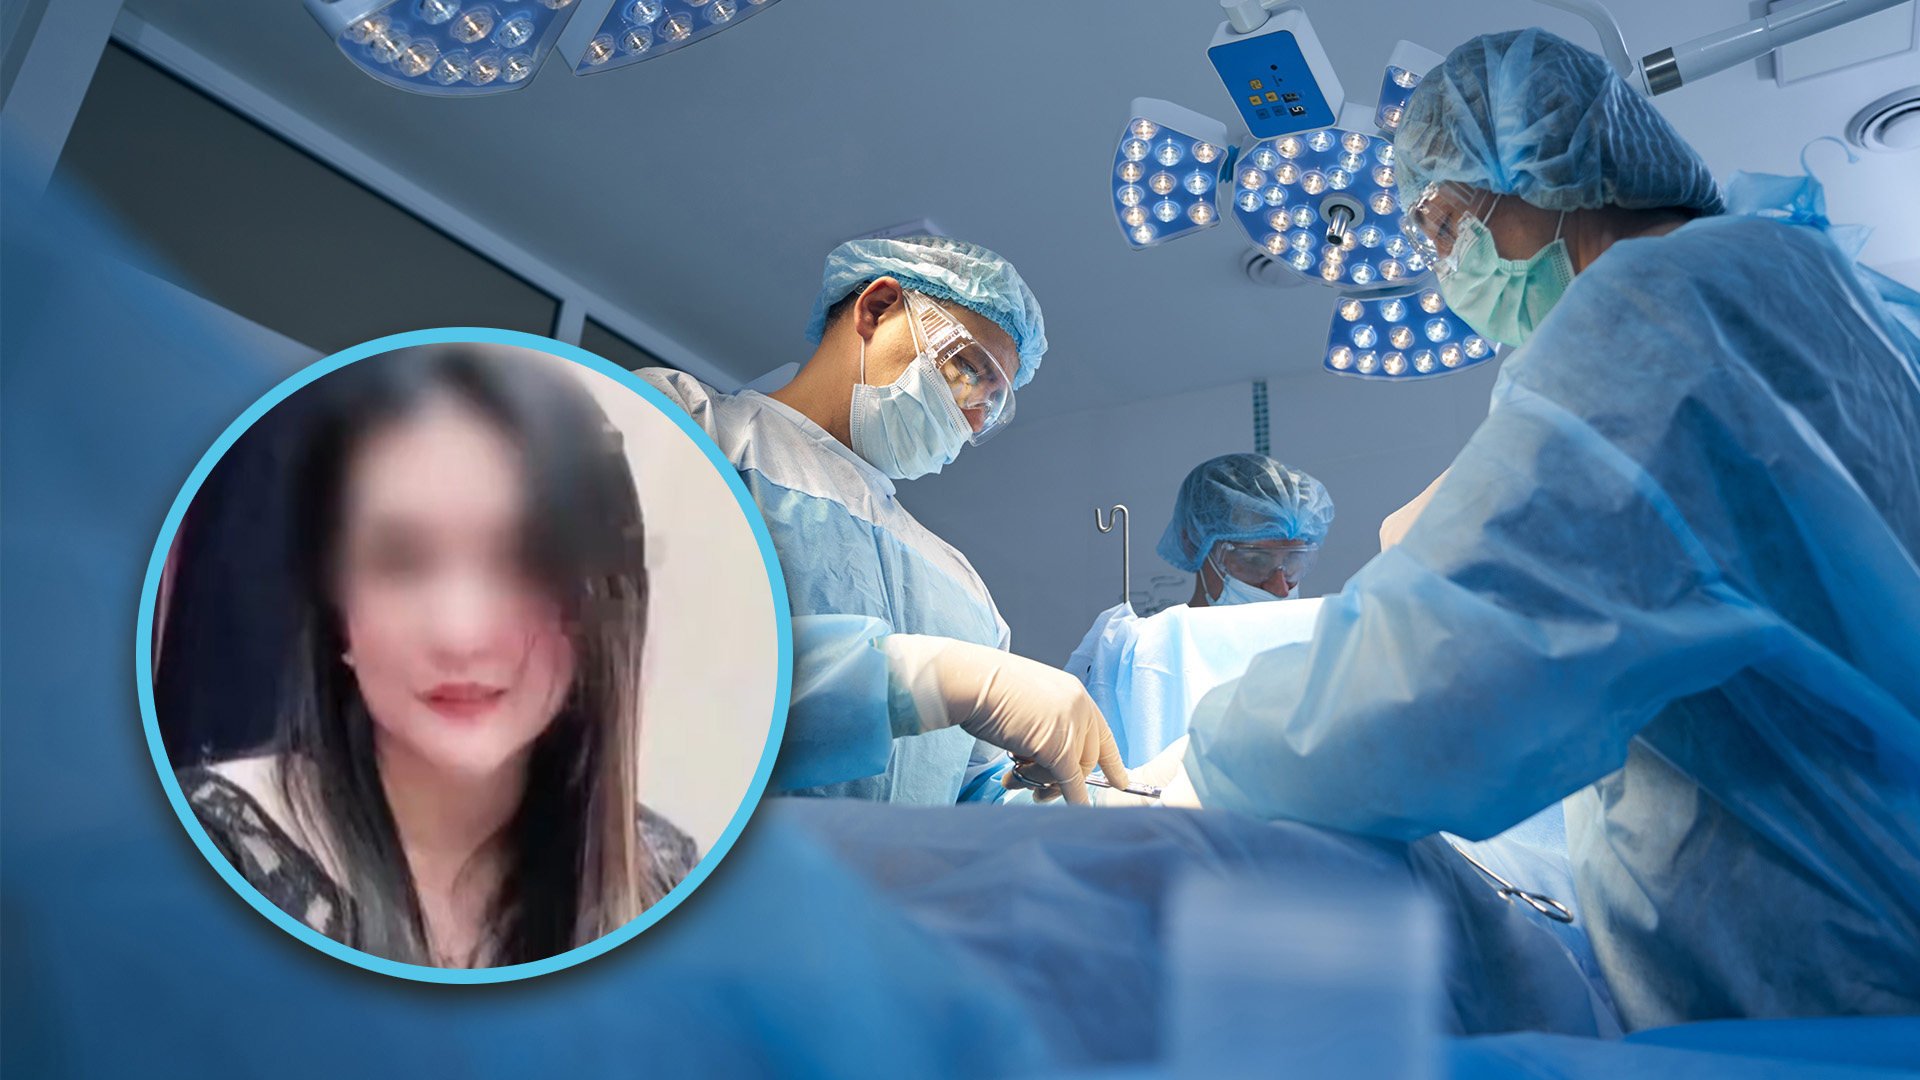 A grieving husband in China is suing a beauty clinic after his wife died on the operating table while undergoing a 
liposuction surgery. Photo: SCMP composite/Shutterstock/Weibo